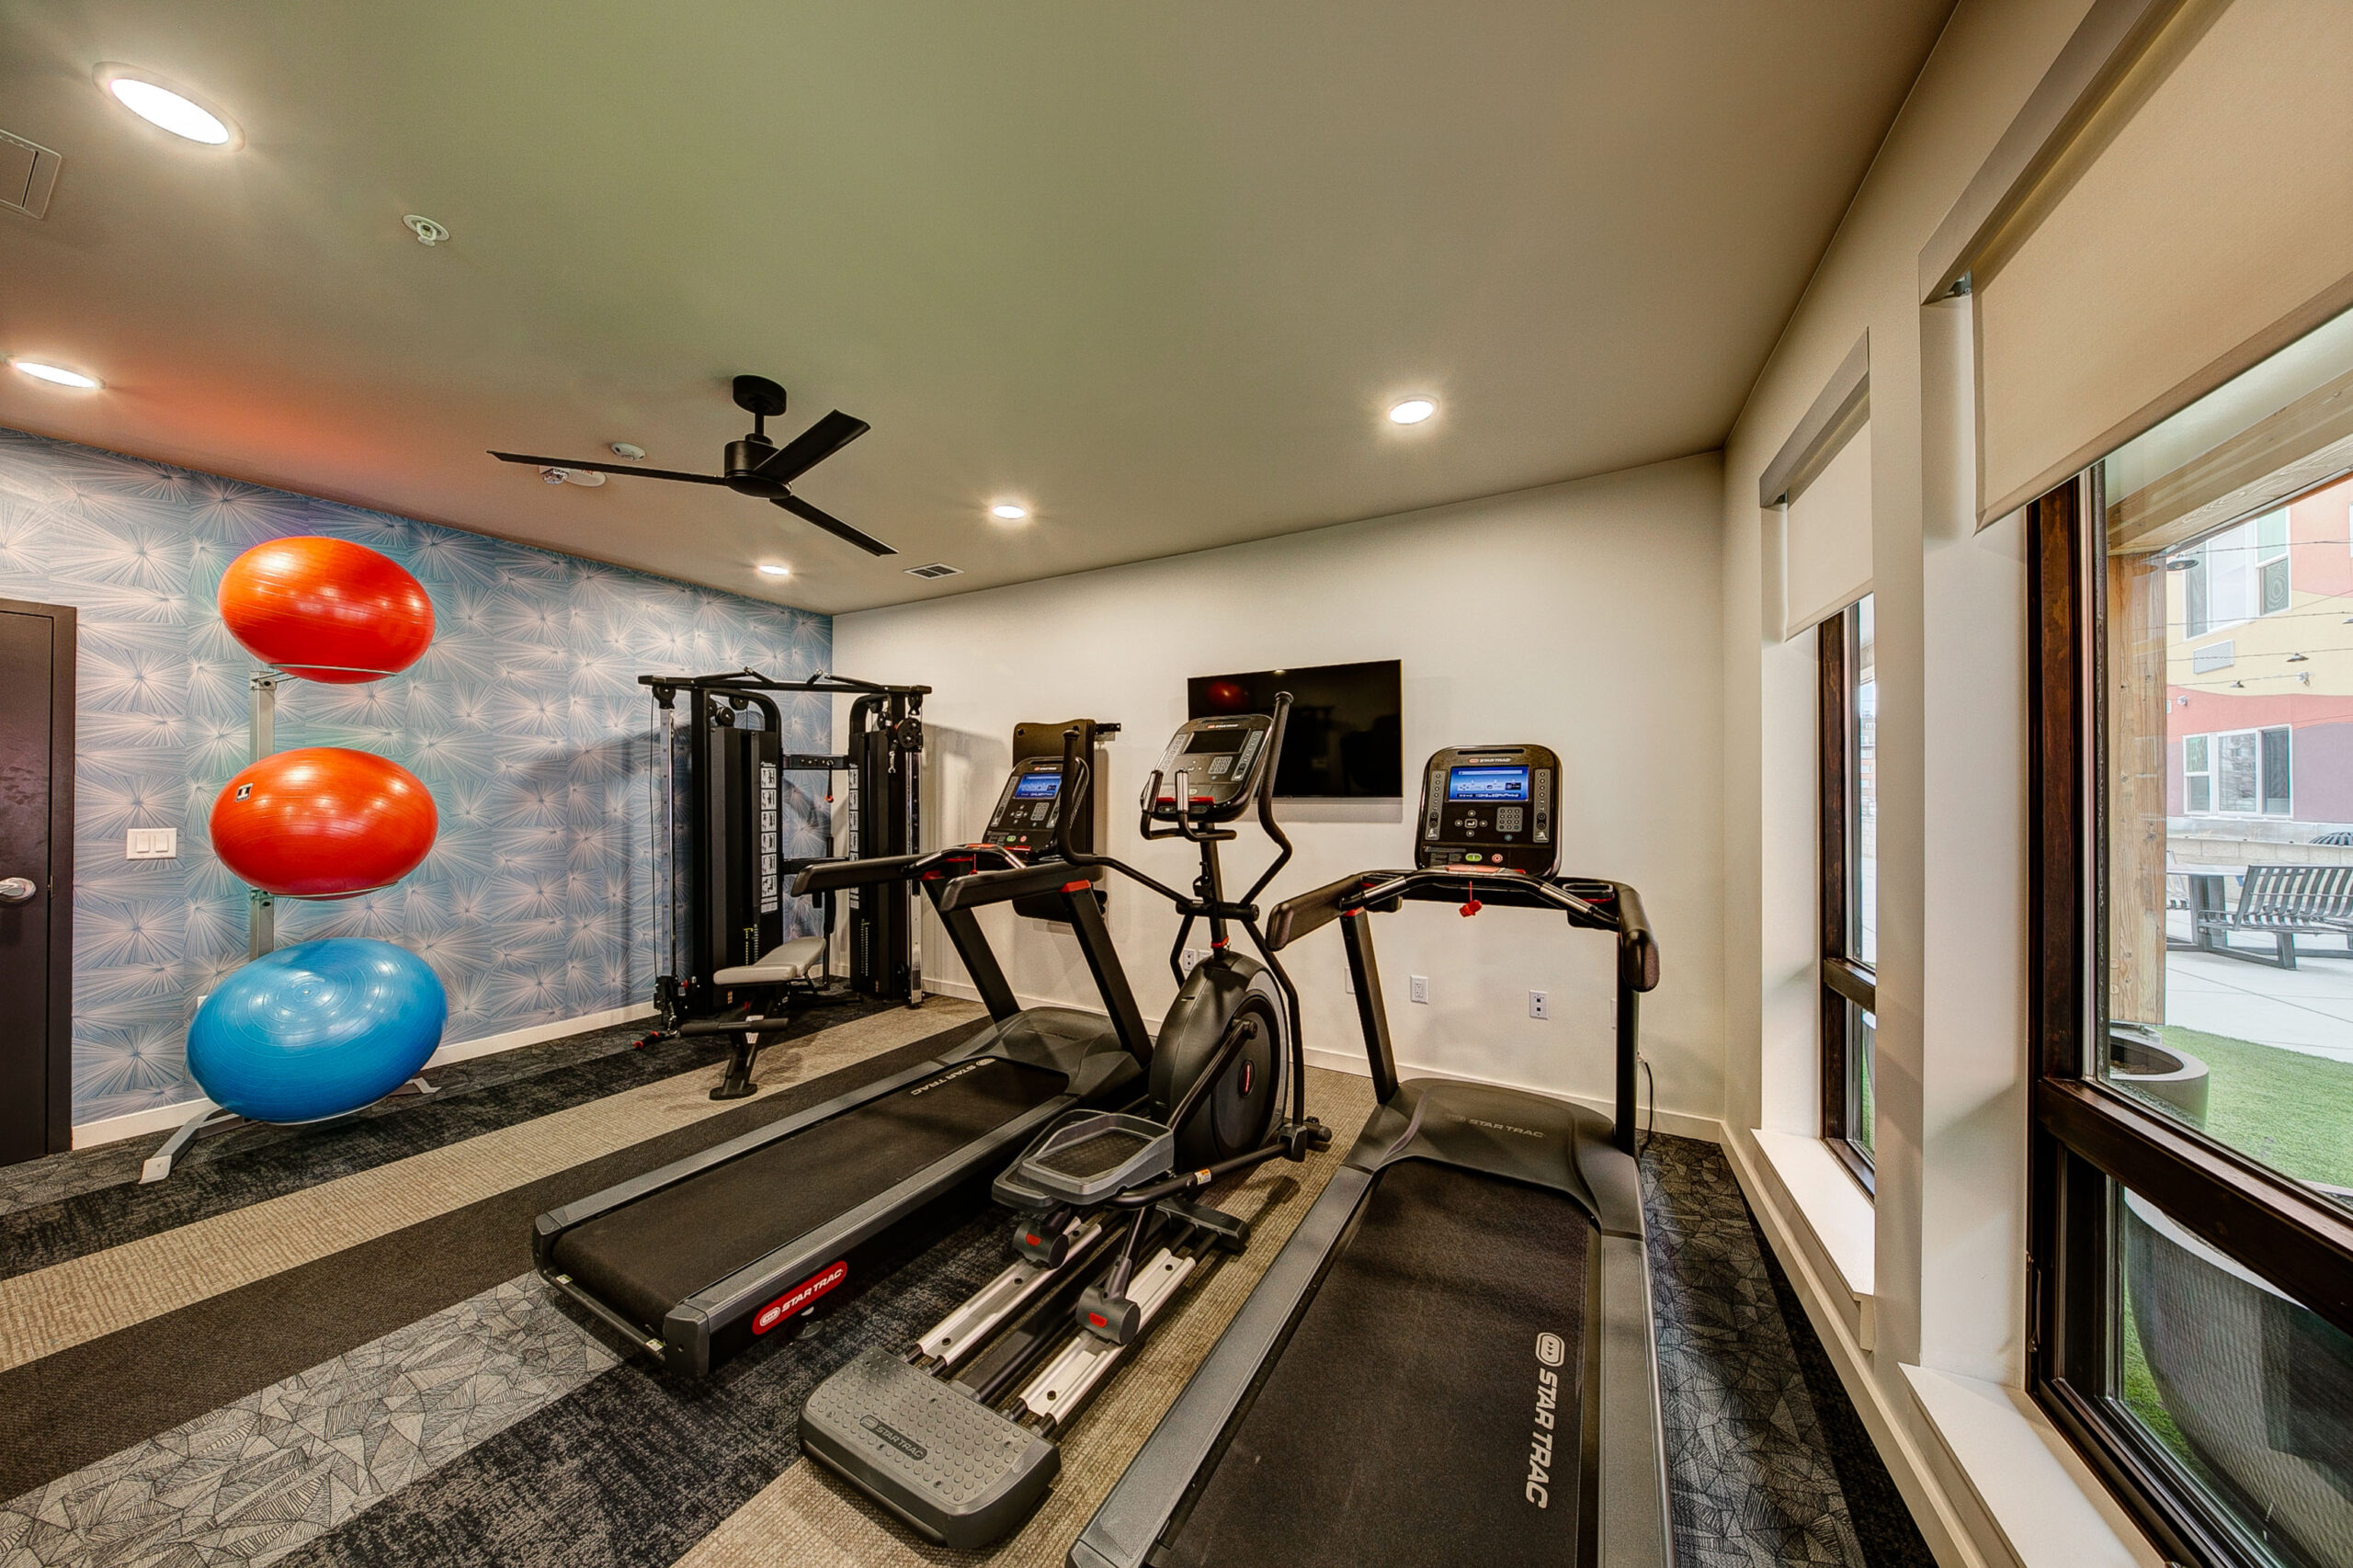 Fitness room with treadmills, weight, and exercise balls